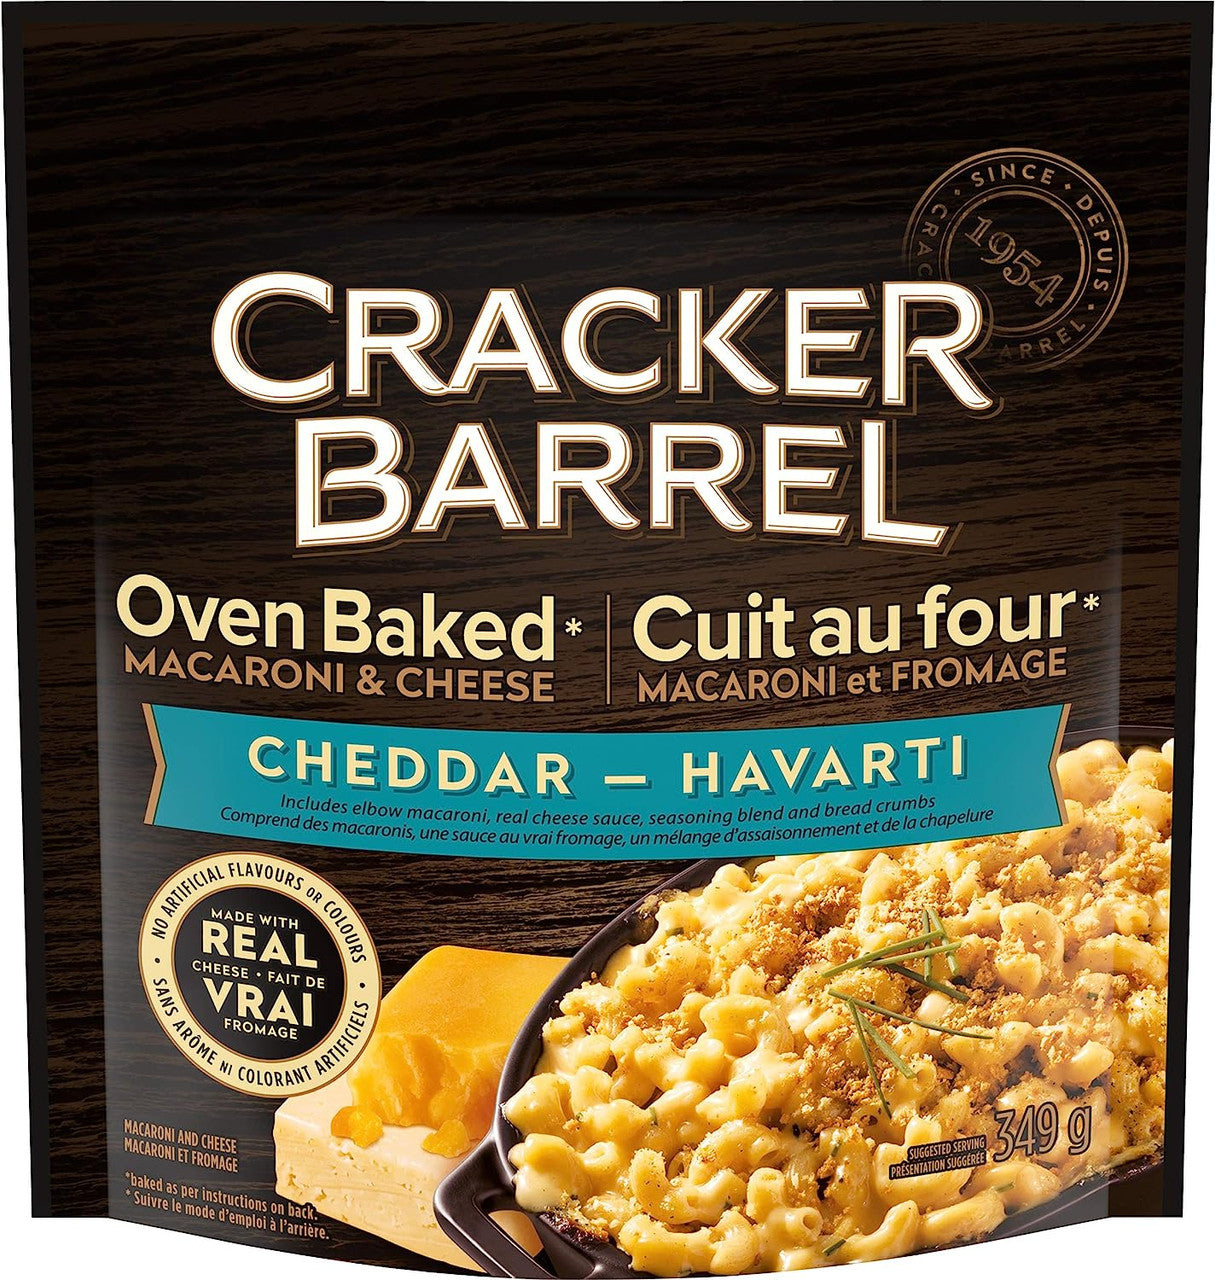 Cracker Barrel Oven Baked Macaroni & Cheese, Cheddar Havarti Cheese, 349g/12 oz. Bag {Imported from Canada}